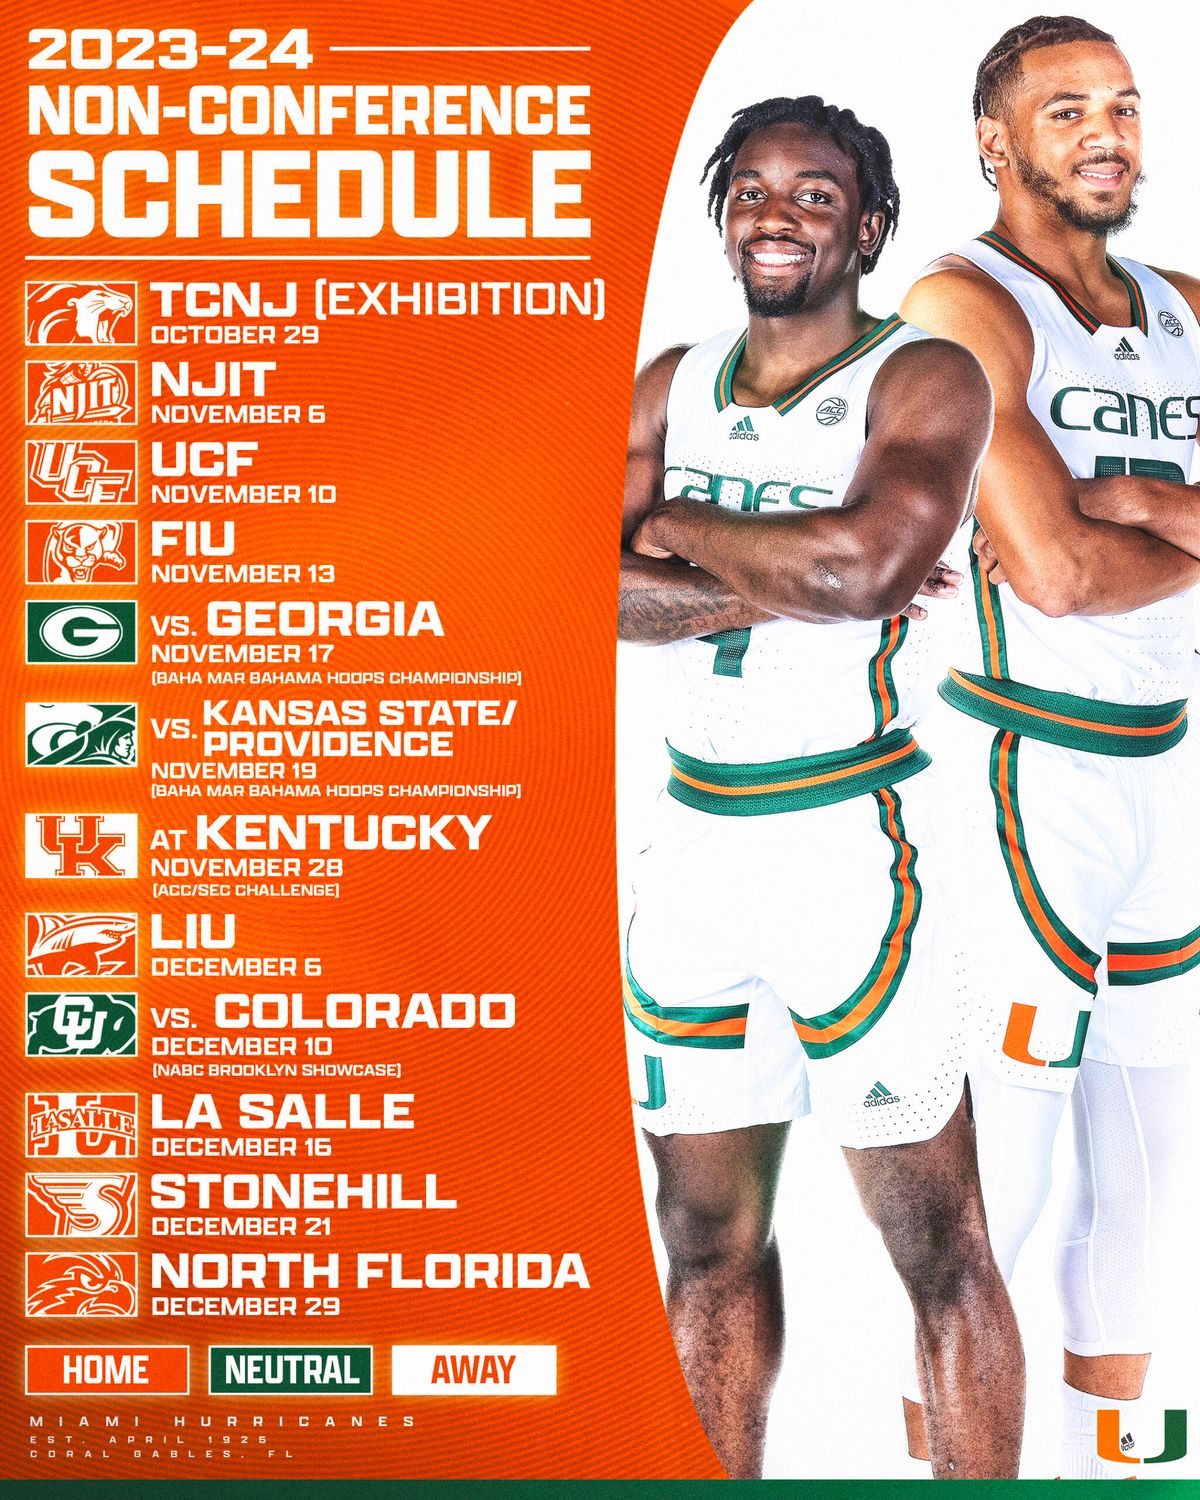 IT'S ALL ABOUT THE U! - Miami Hurricanes Men's Basketball